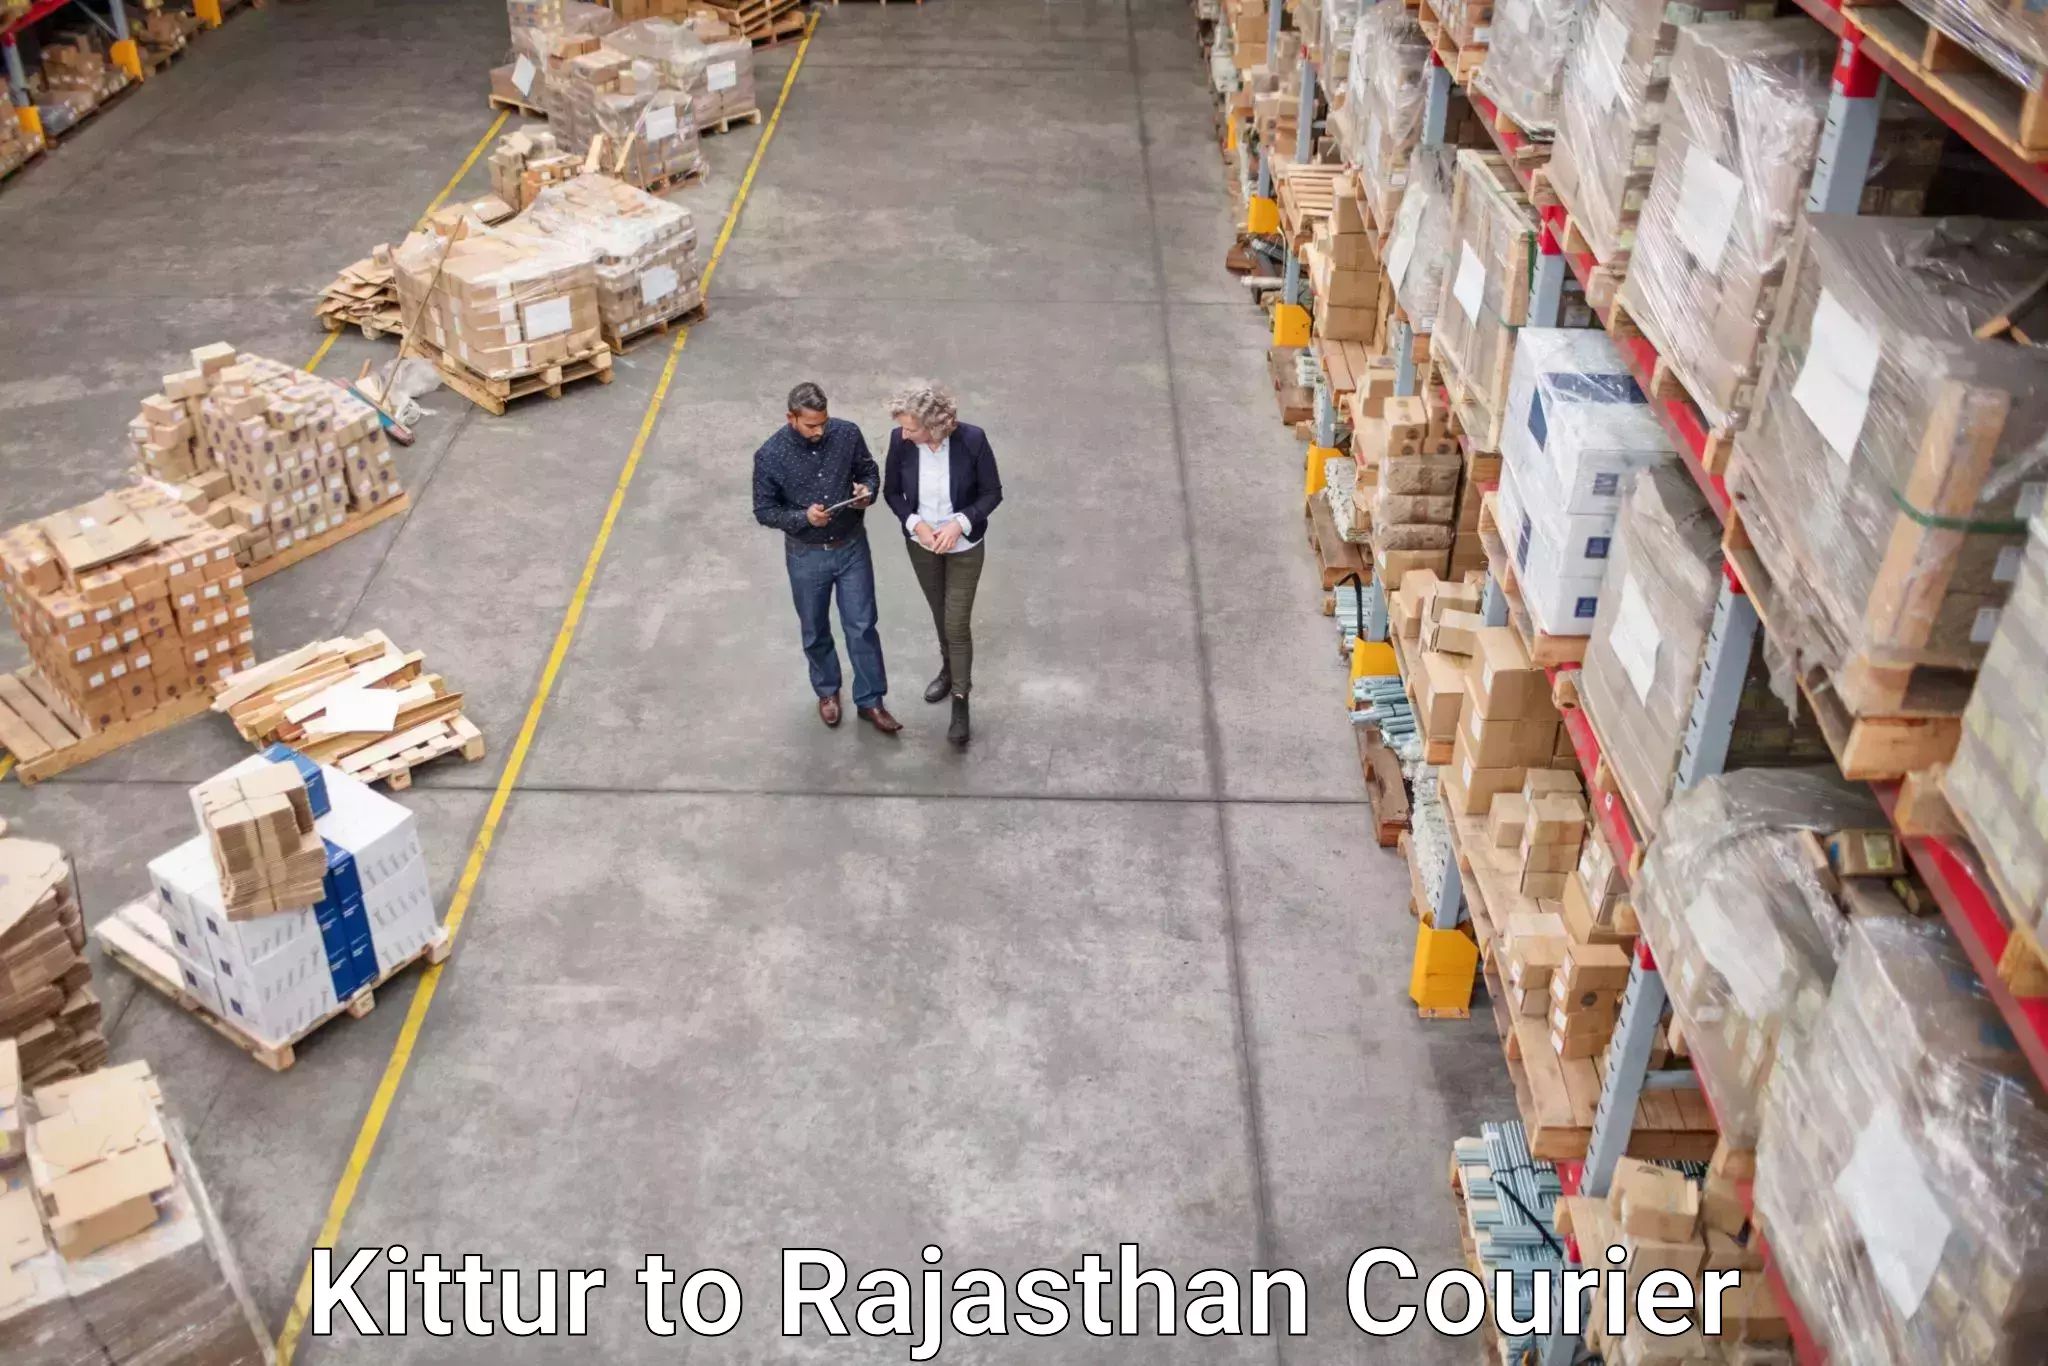 Express delivery network Kittur to Rajasthan